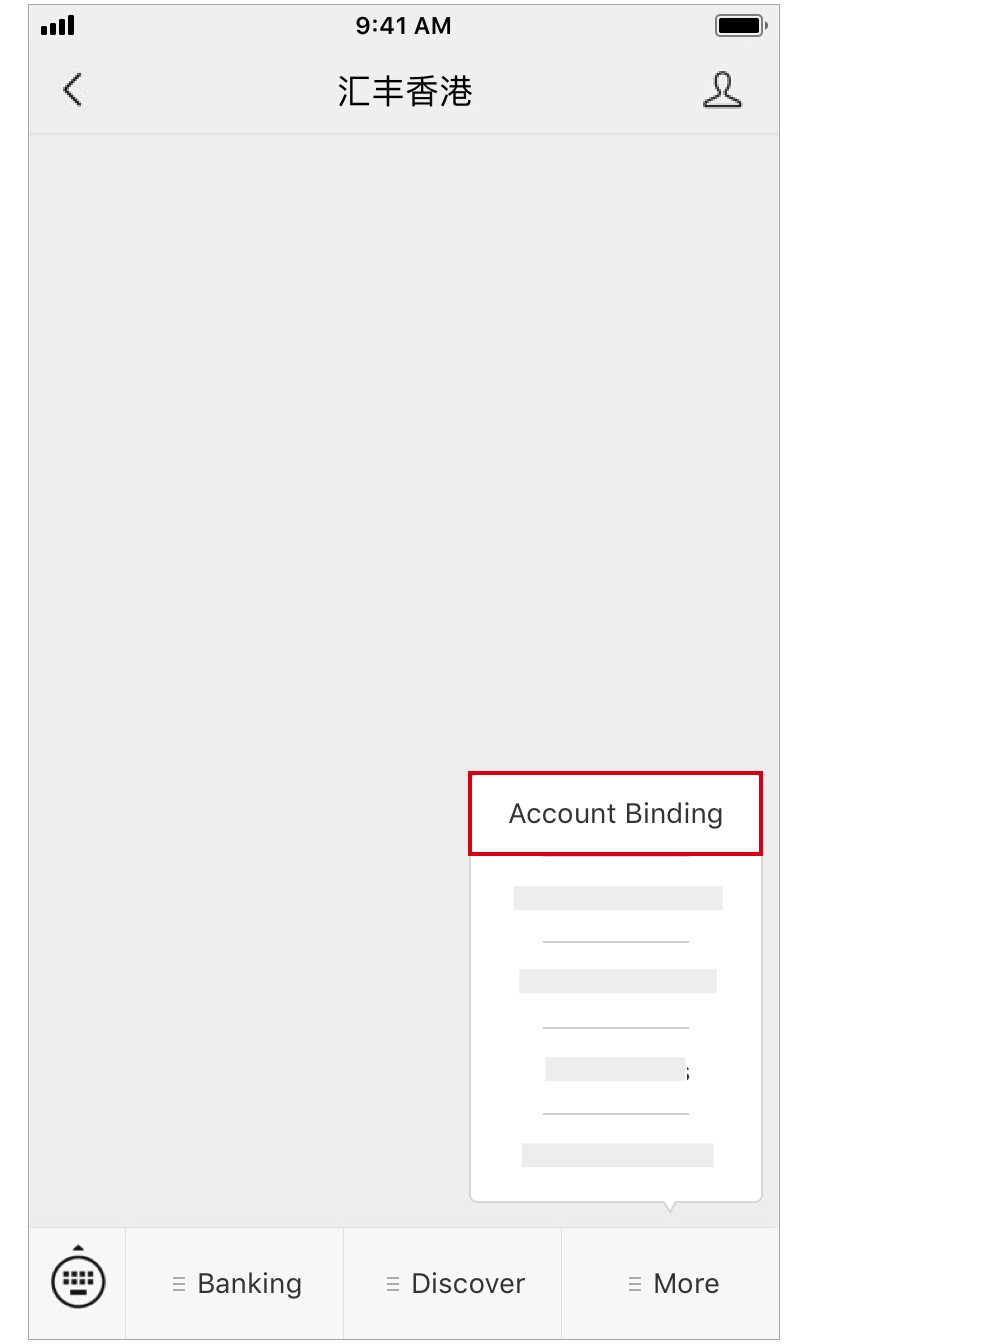 Screenshot of step 1 for binding steps; image used for the HSBC Hong Kong WeChat page.